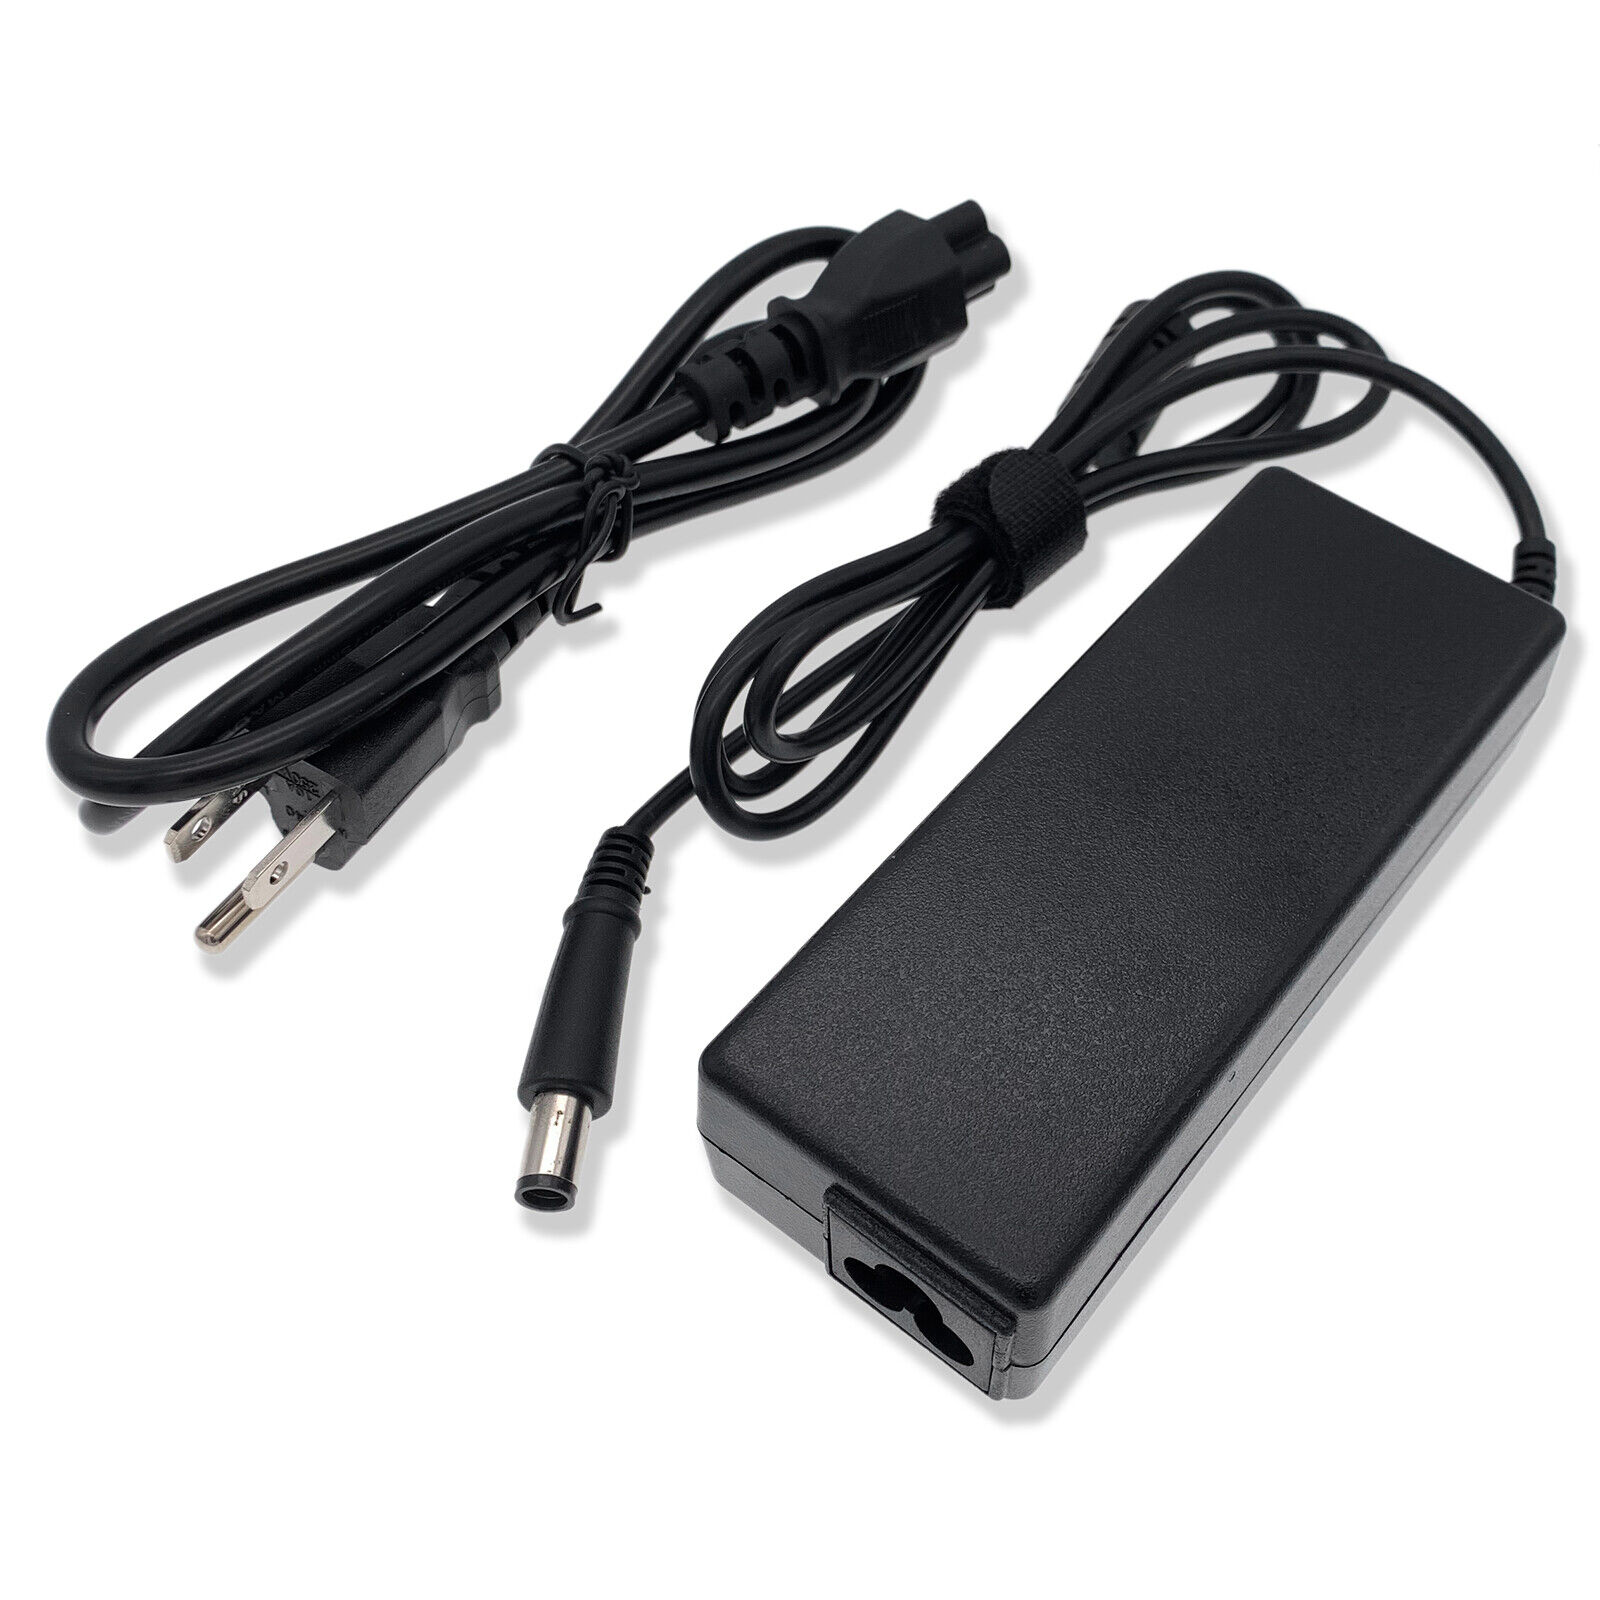 90W AC Adapter for HP Pavilion dv7-3065DX dv7-3165DX Laptop Charger Power Cord